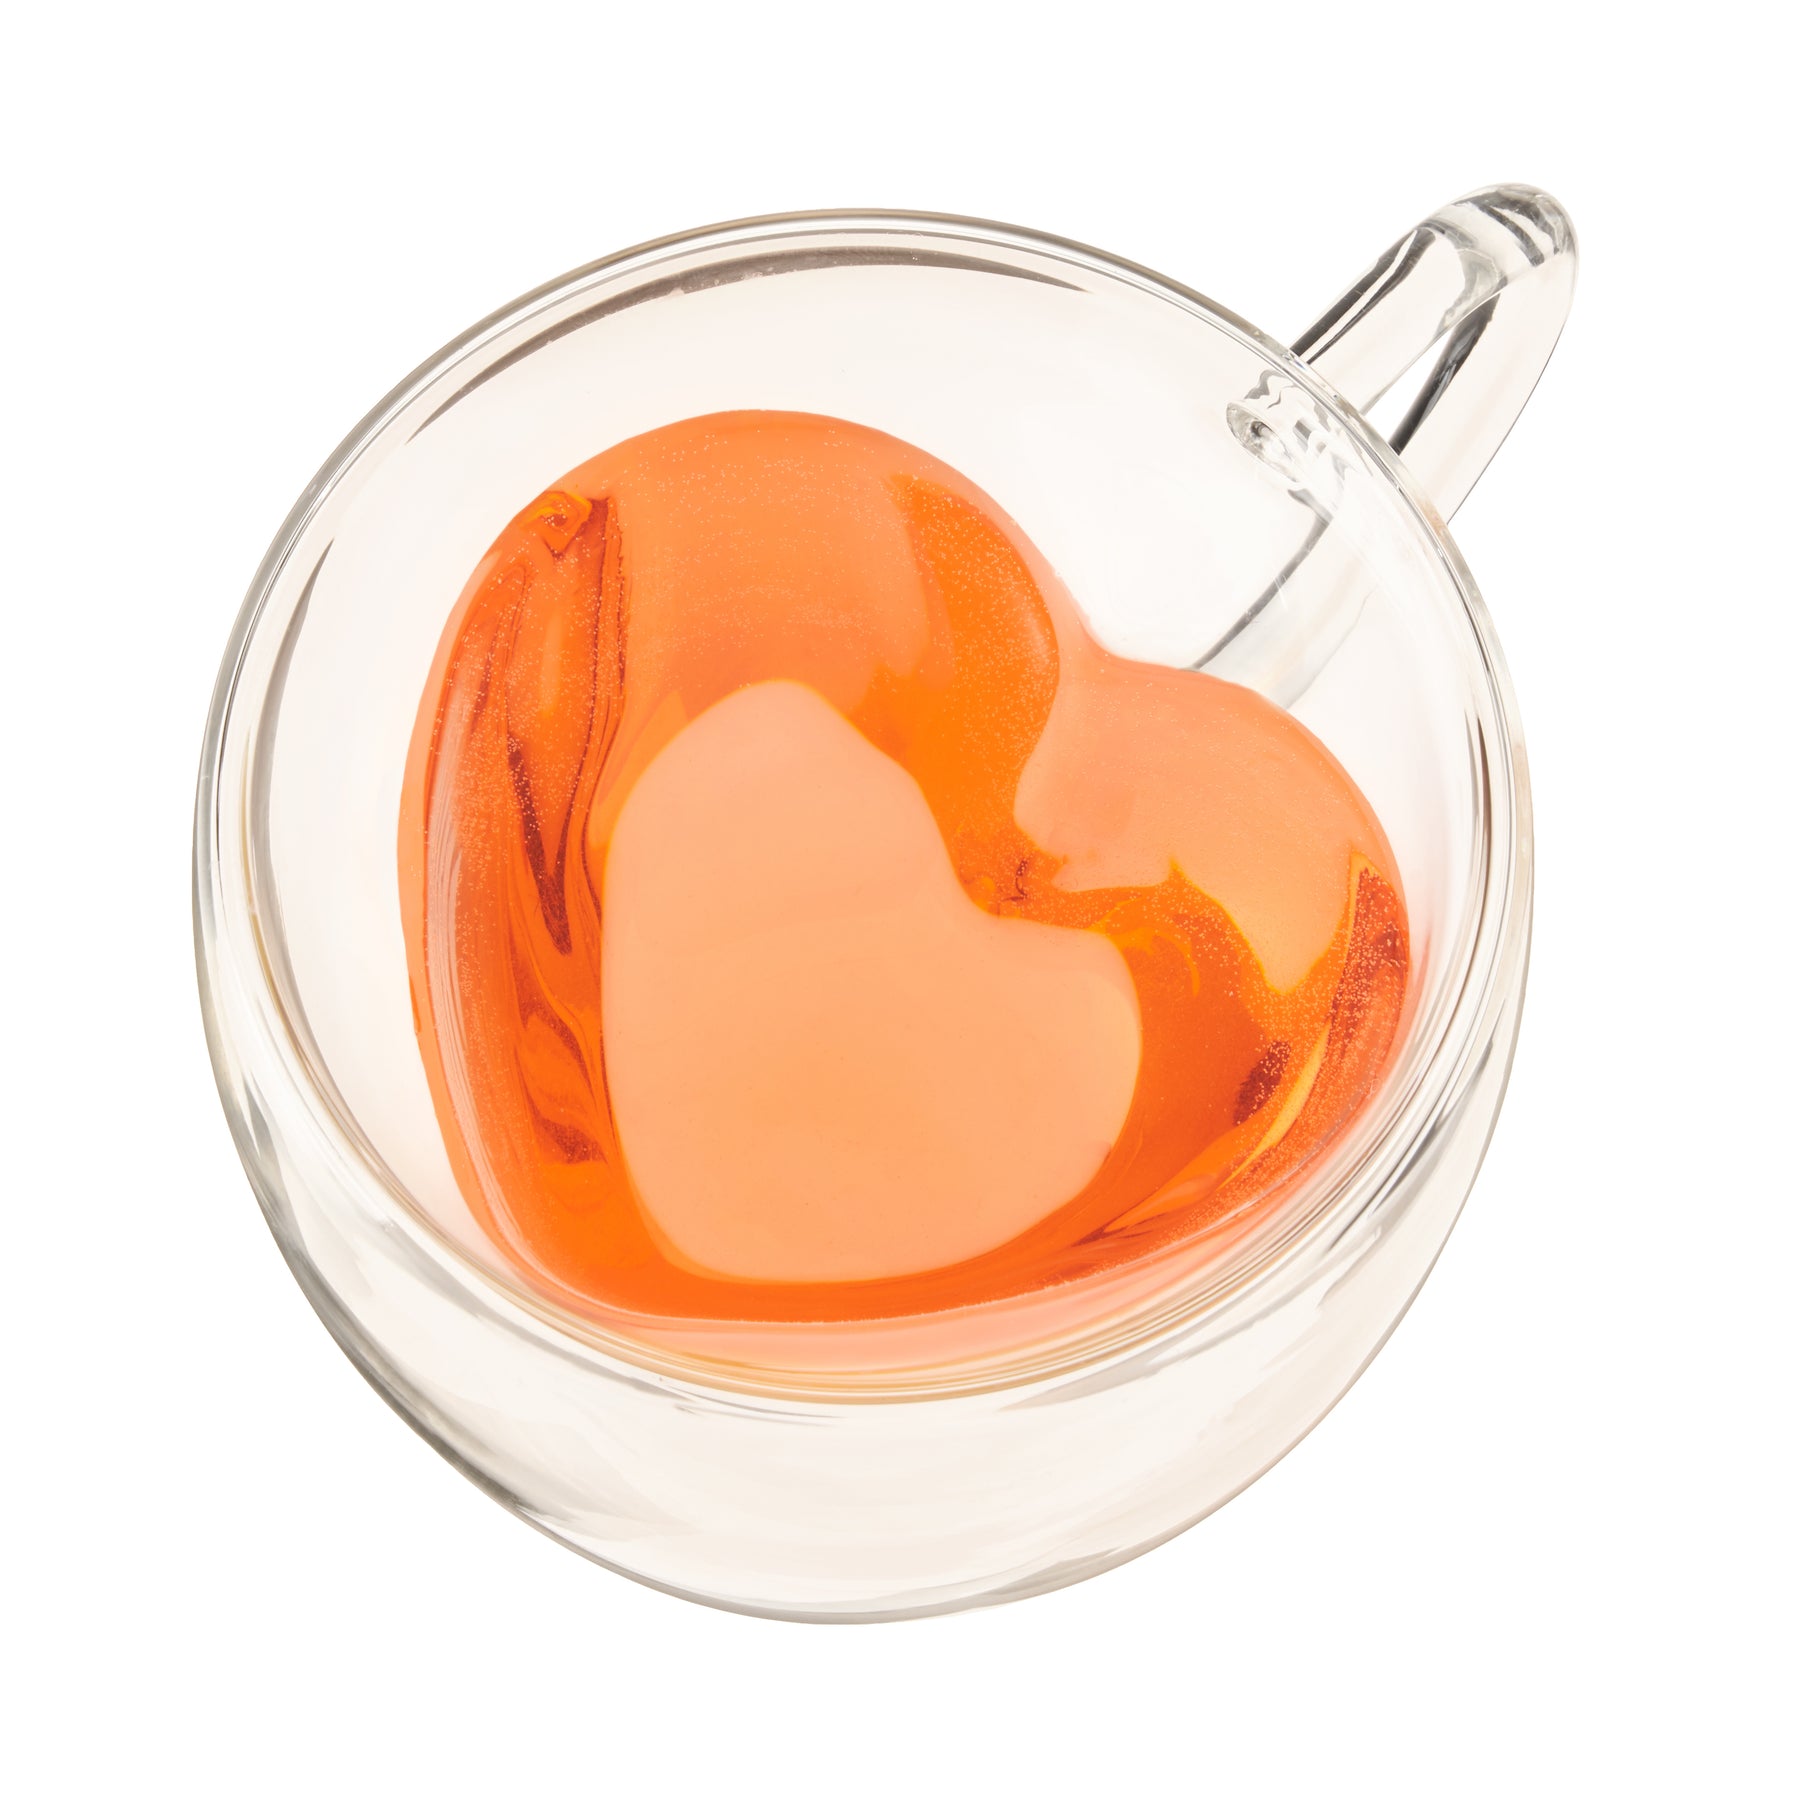 Heart Shaped Double Walled Insulated Glass Coffee Mugs or Tea Cups